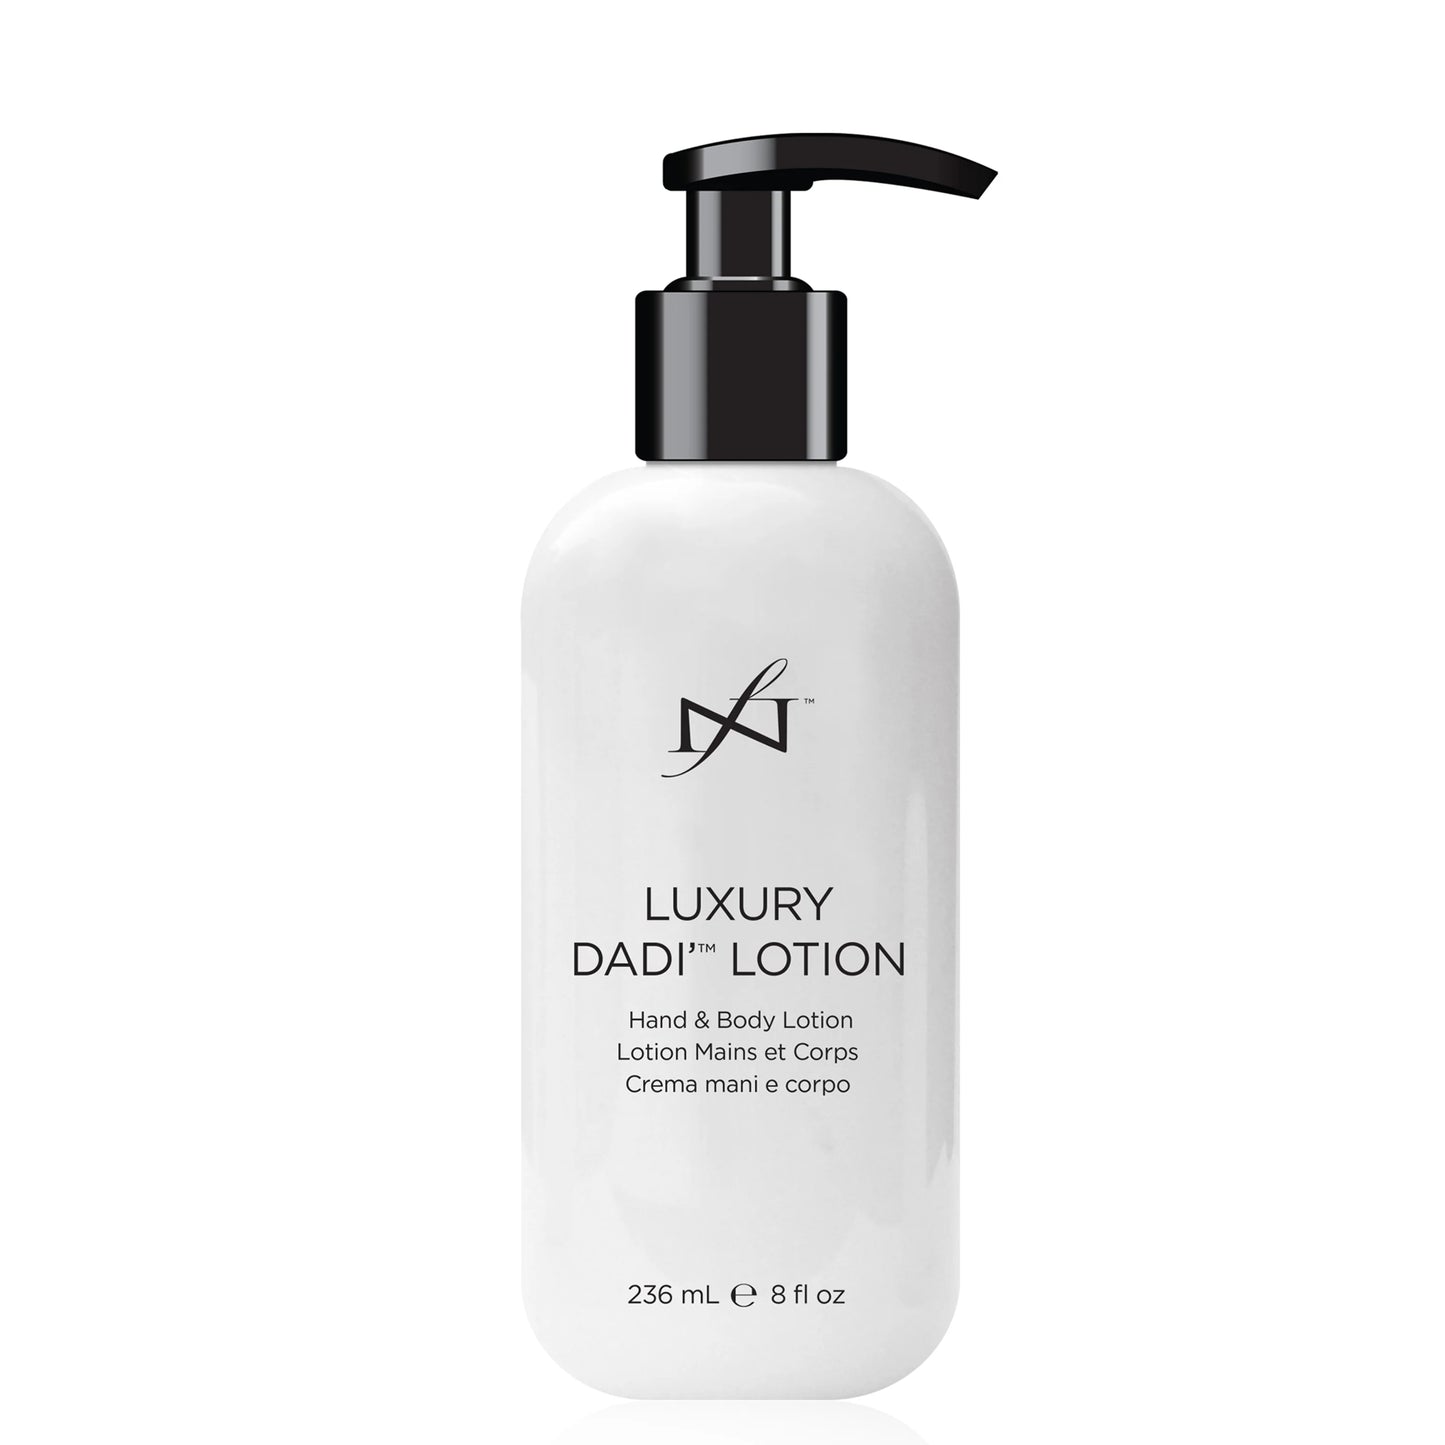 Luxury Dadi' Lotion | Famous Names Products